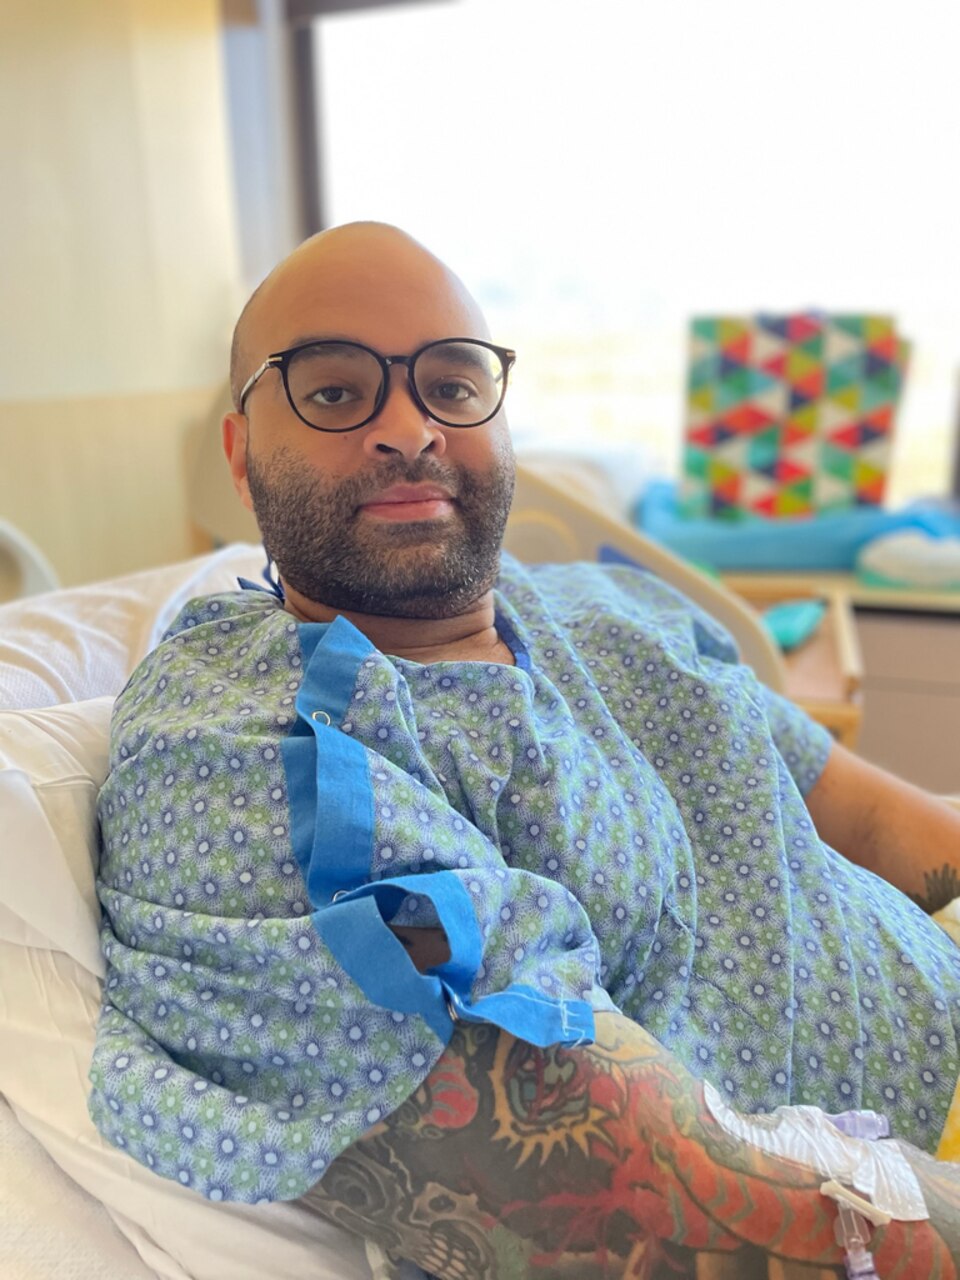 Information Systems Technician Second Class Thomas James recuperates in Centura Penrose Hospital, Colorado Springs, on Nov. 26, 2022.  James was among those injured in the Colorado nightclub shooting on Nov. 19.